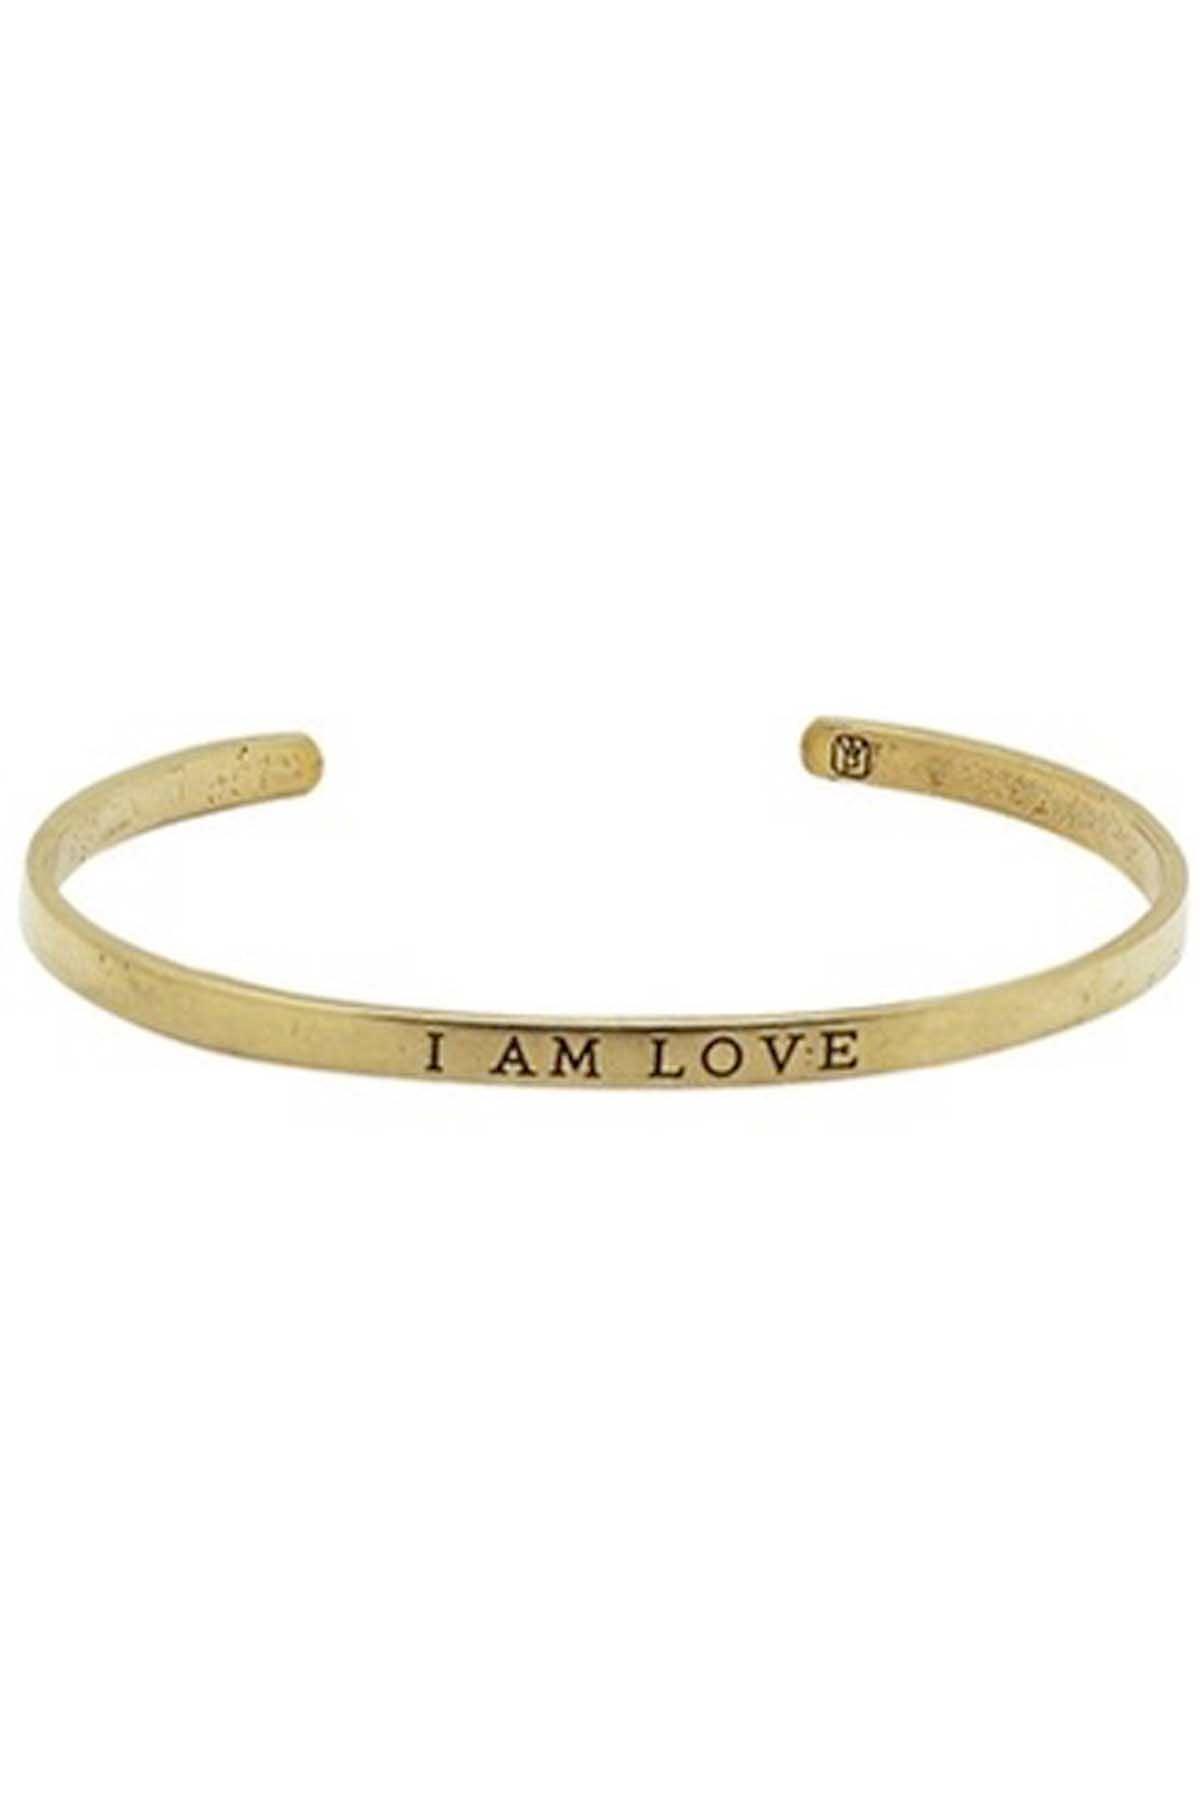 brass  I Am Love Cuff by Waxing Poetic